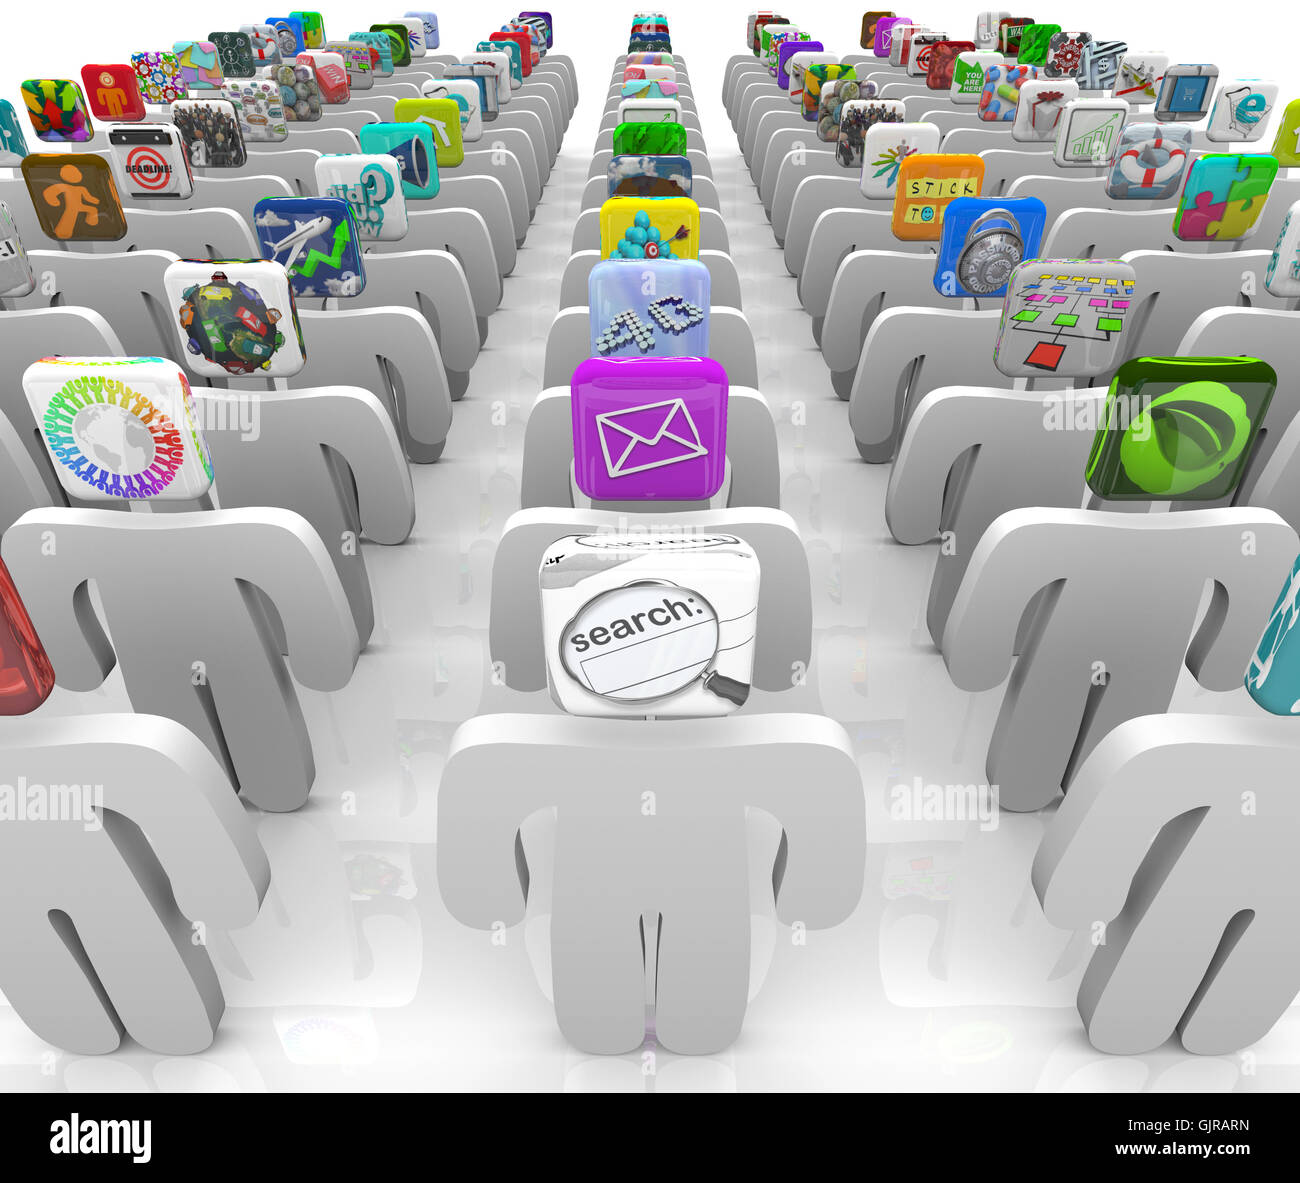 The Apps Marketplace - People with Icon Heads in Rows Stock Photo